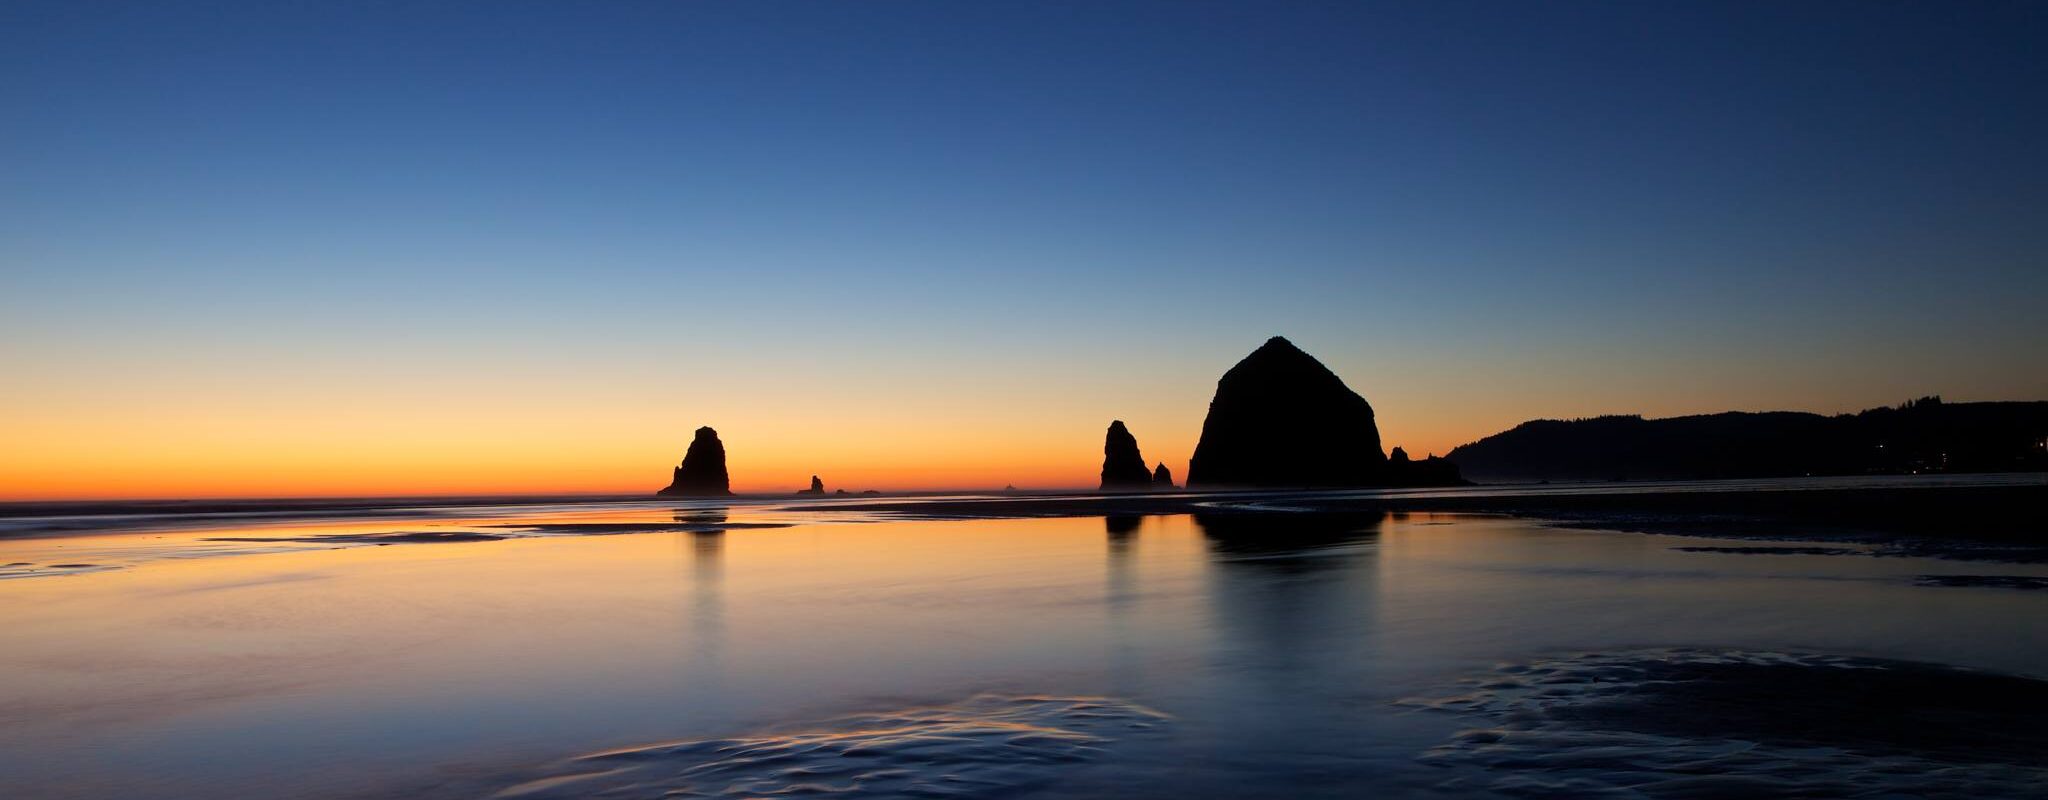 Cannon Beach - Haystack Rock after sunset